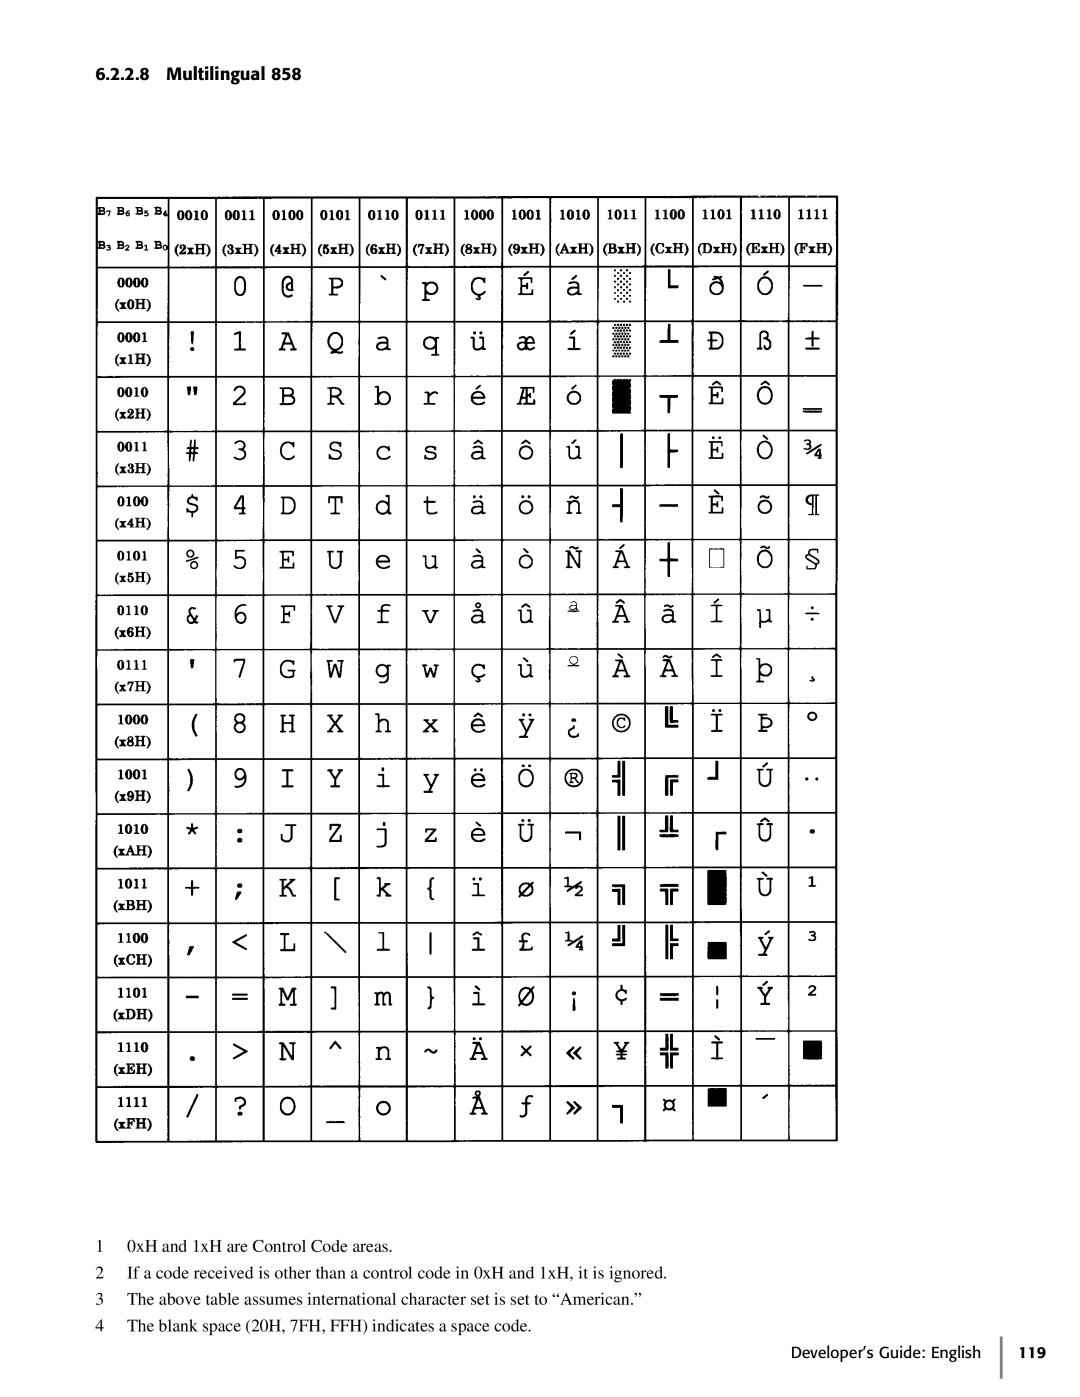 Oki 425D manual Multilingual, 1 0xH and 1xH are Control Code areas, The blank space 20H, 7FH, FFH indicates a space code 